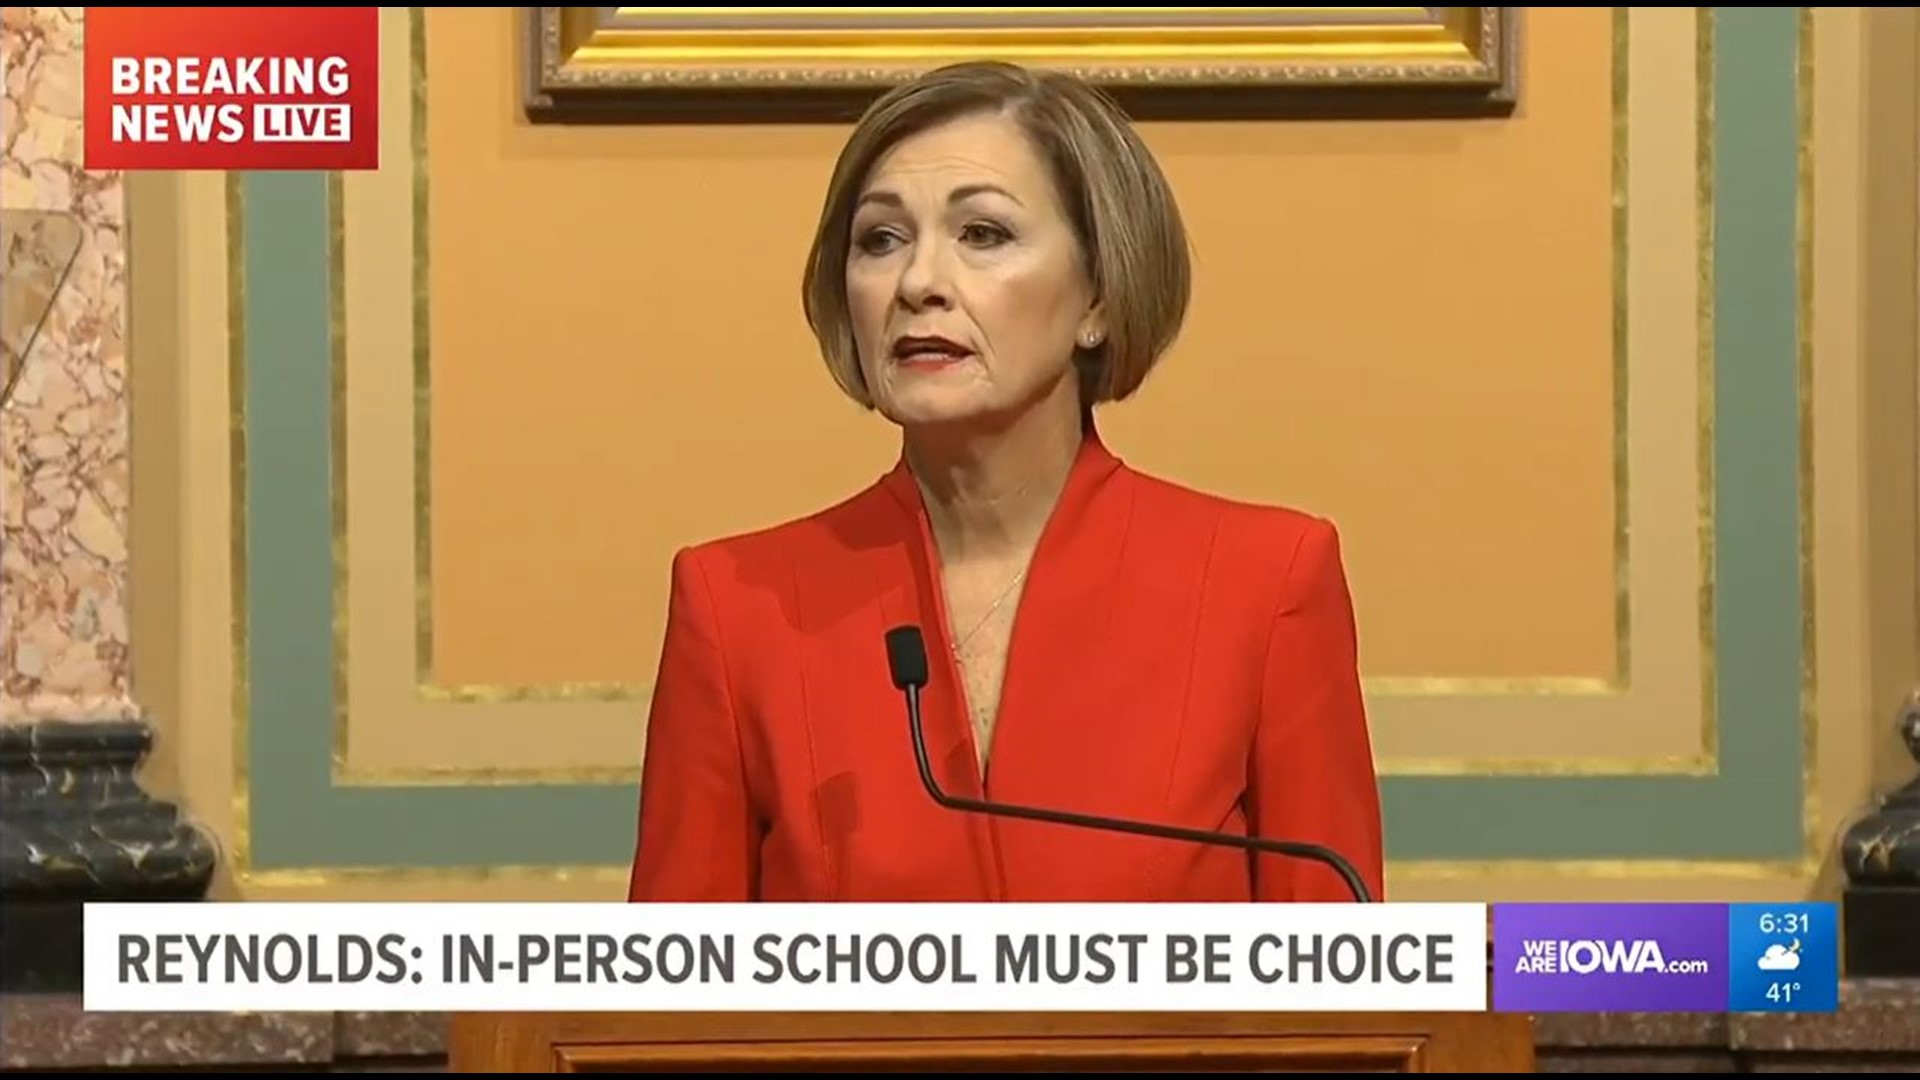 In her 2021 Condition of the State address, Reynolds said Iowa families deserve the option to send their children to school in the classroom.